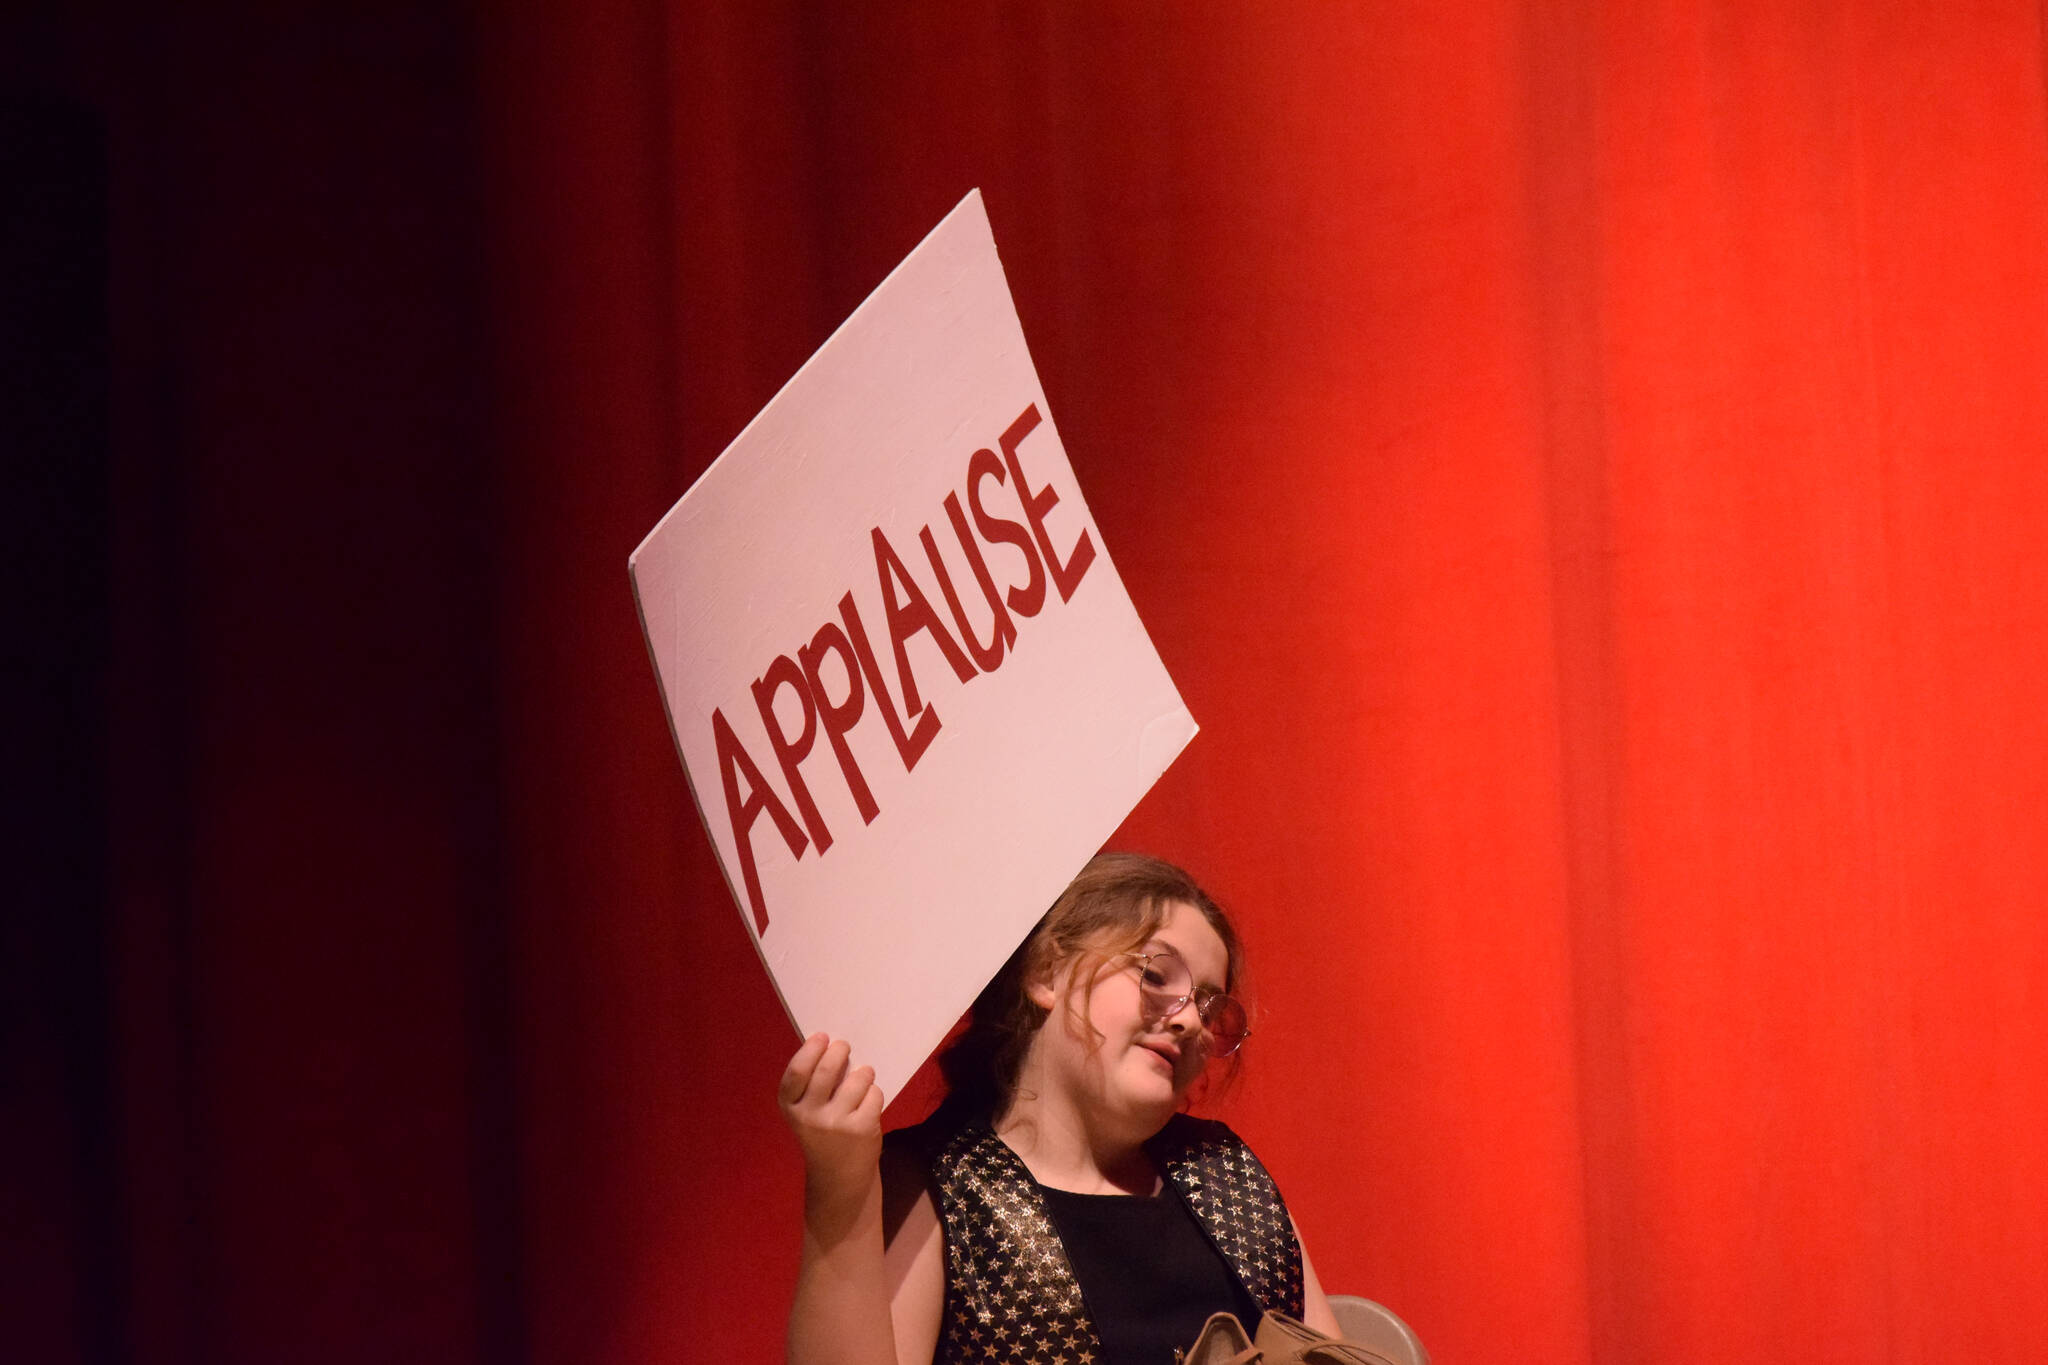 A cast member holds up a cue card in Soldotna High School’s production of "Annie" on Tuesday, Nov. 9, 2021. (Camille Botello/Peninsula Clarion)